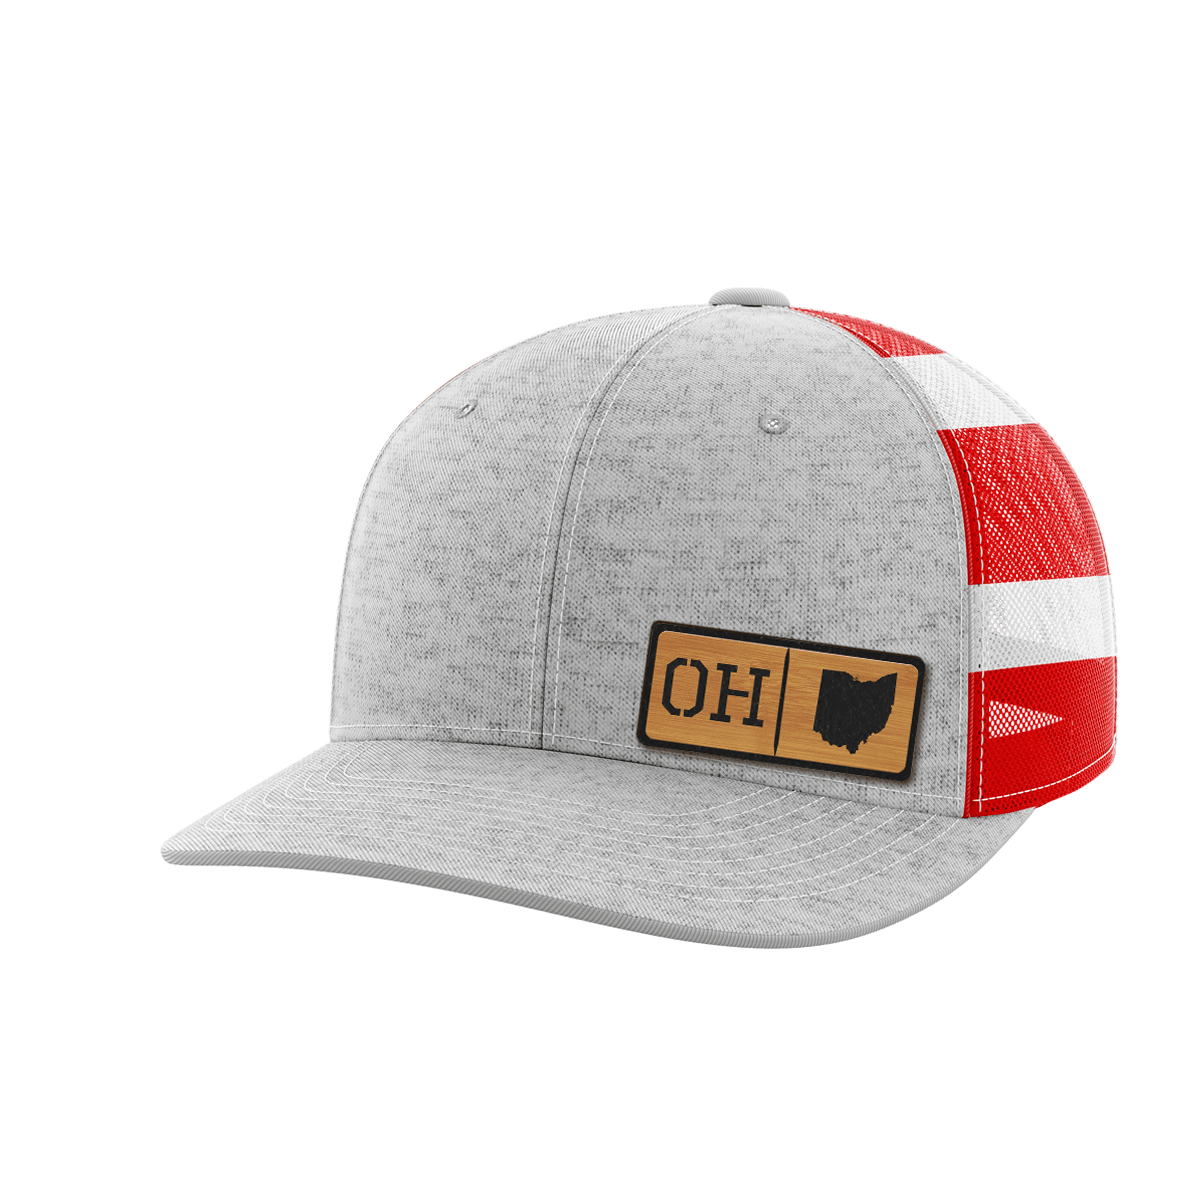 Ohio Homegrown Hats - Greater Half